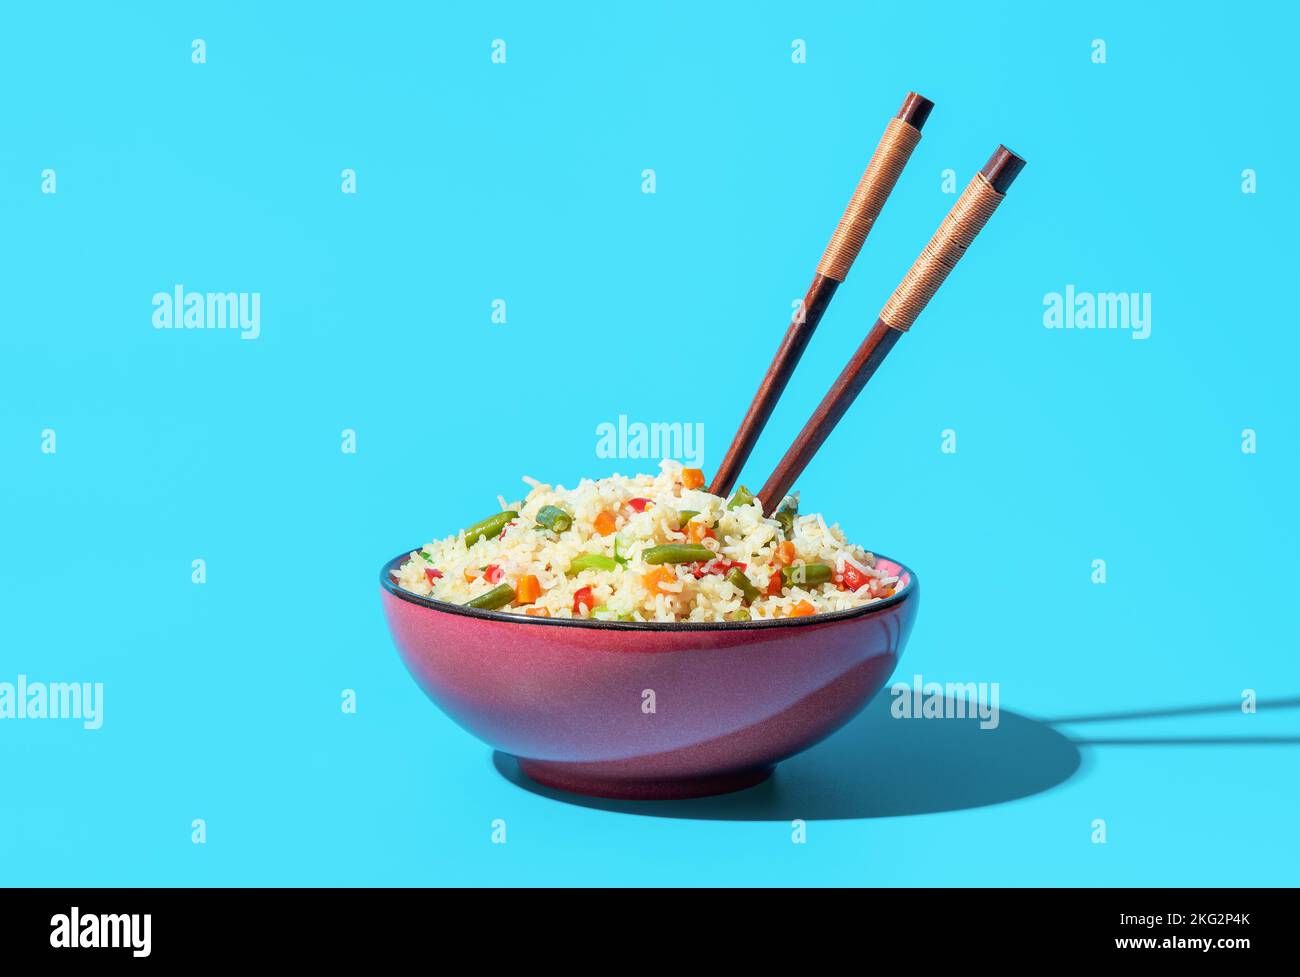 Close-up with a bowl with fried rice dish and chinese chopsticks. Delicious asian dish, fried rice with a mix of chopped vegetables, minimalist on a b Stock Photo